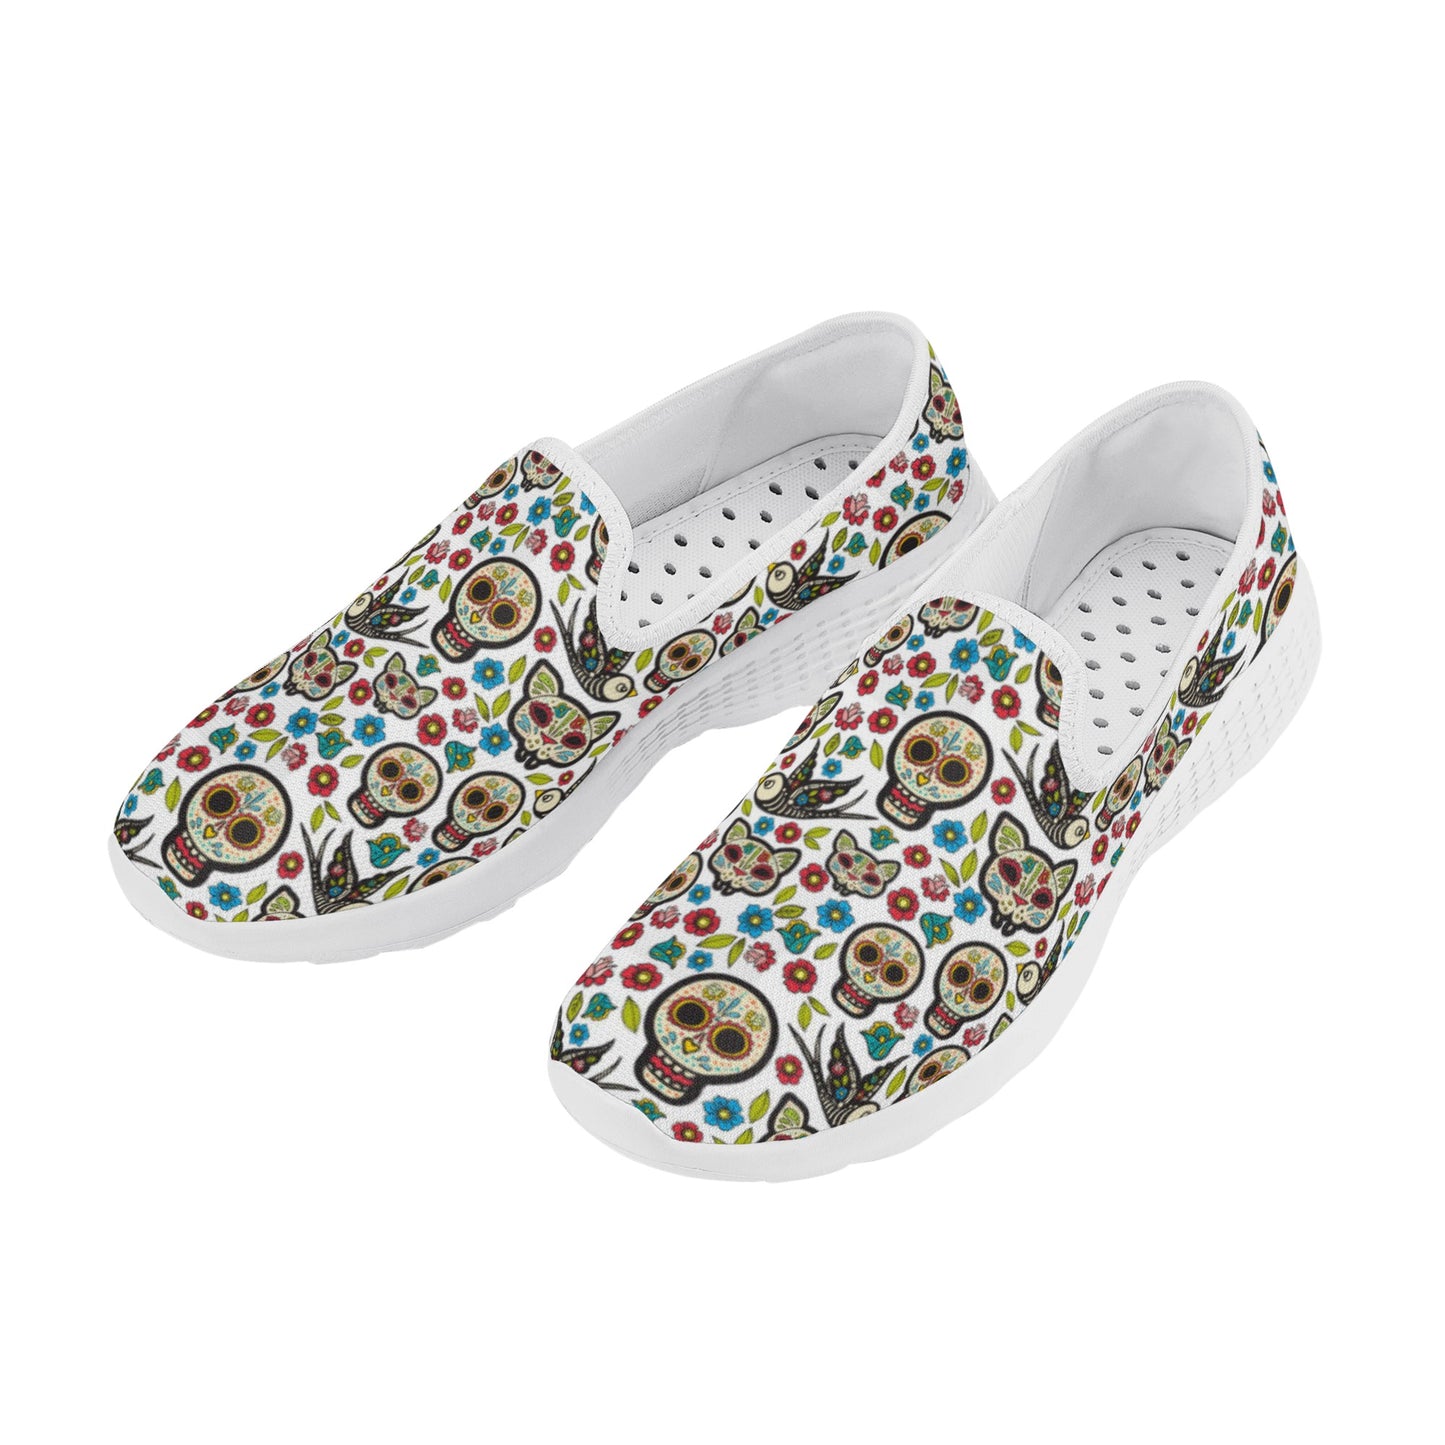 Sugar skull day of the dead Women's New Casual Slip on Shoes